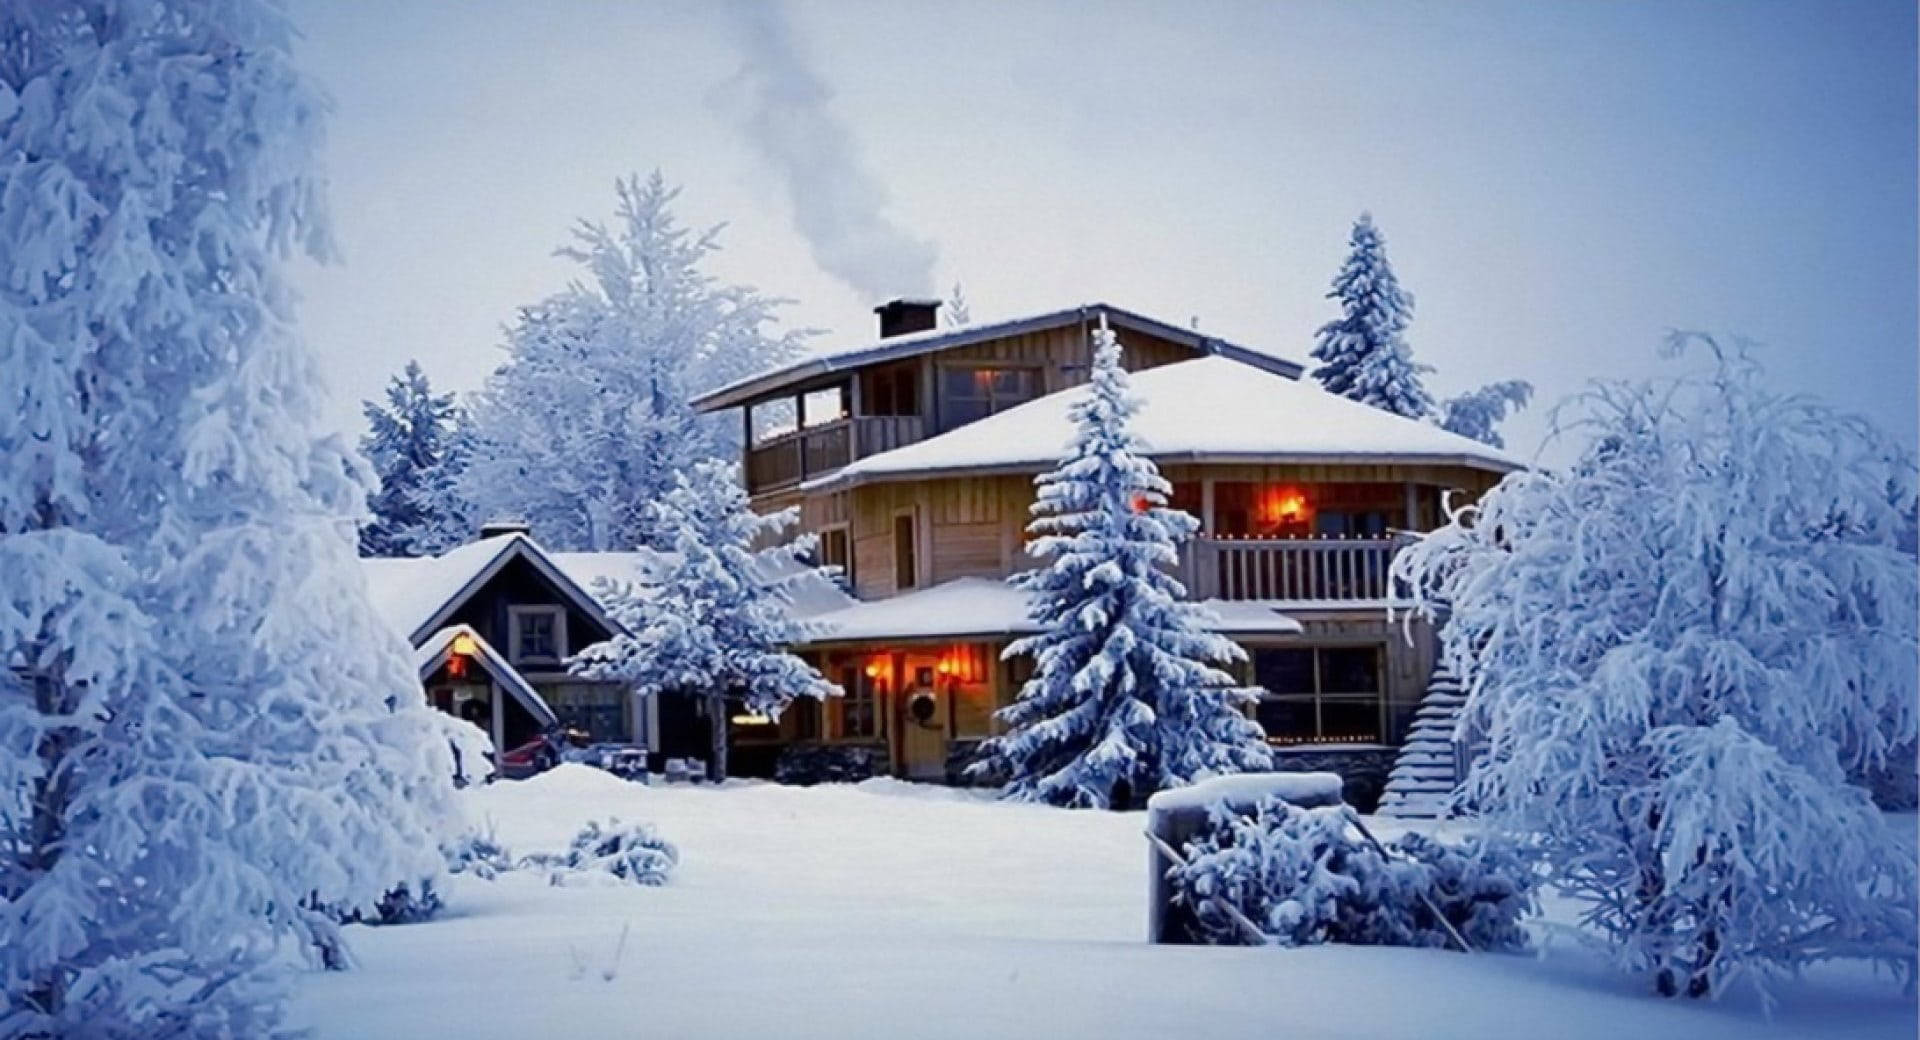 Cozy Winter Mansion Covered In Snow Wallpaper